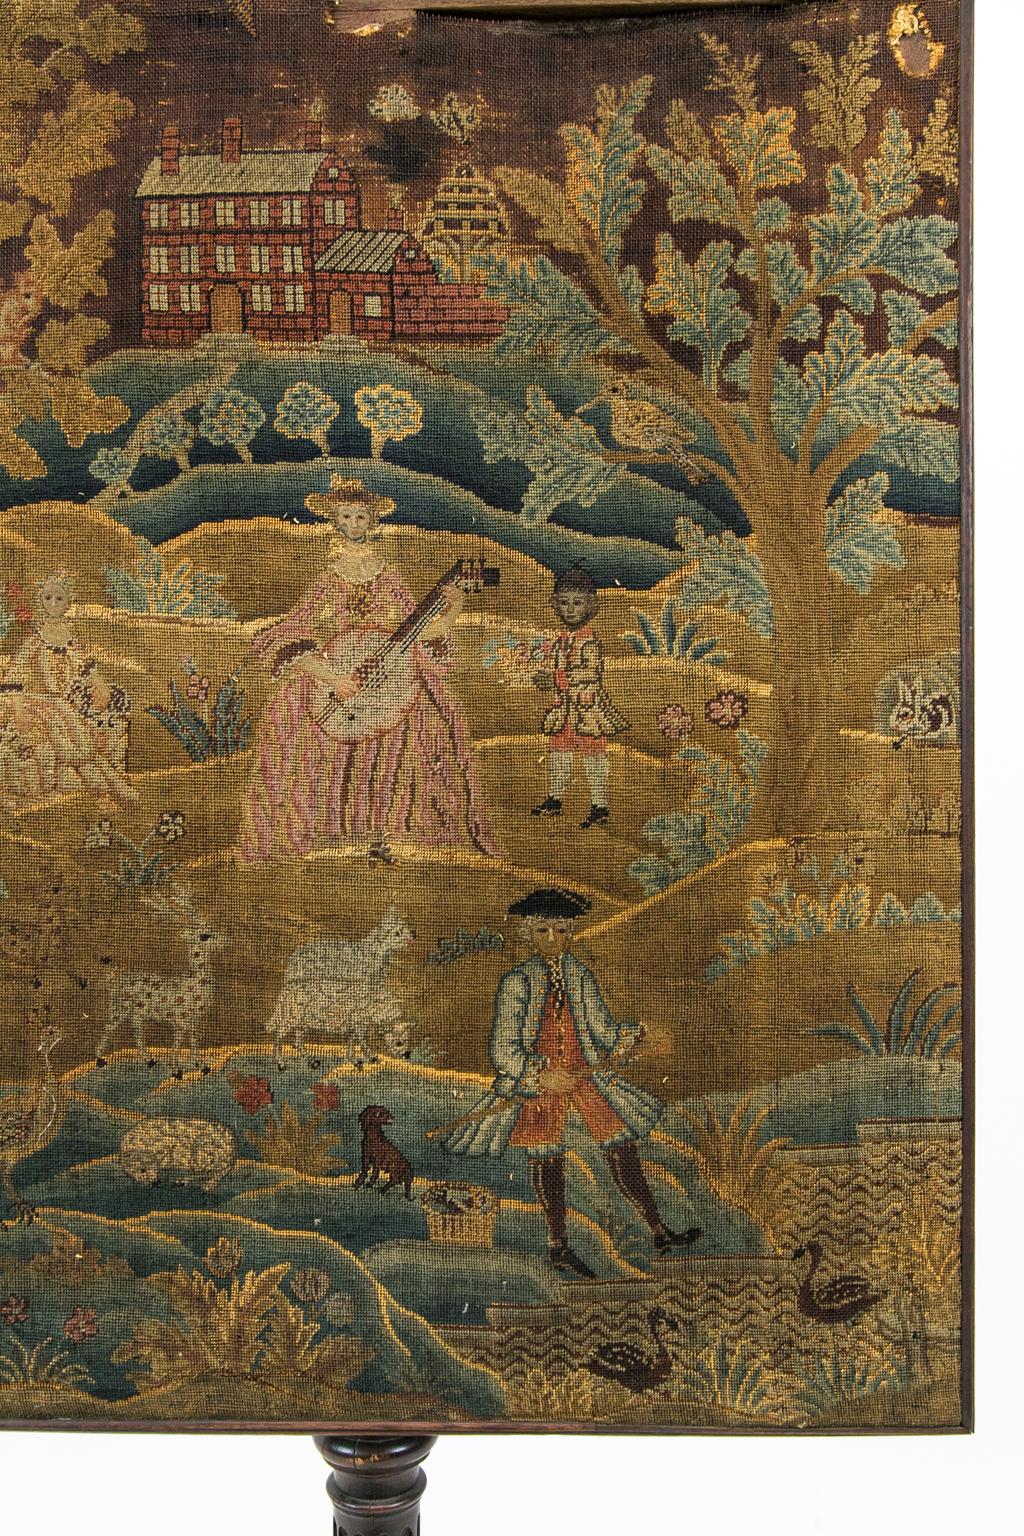 George III needlework fire screen depicts an English manor house with dogs, deer, and peacocks on a landscape. A woman is playing the mandolin while children are playing. The faces of the figures are stitched in raised petit point. The stem is